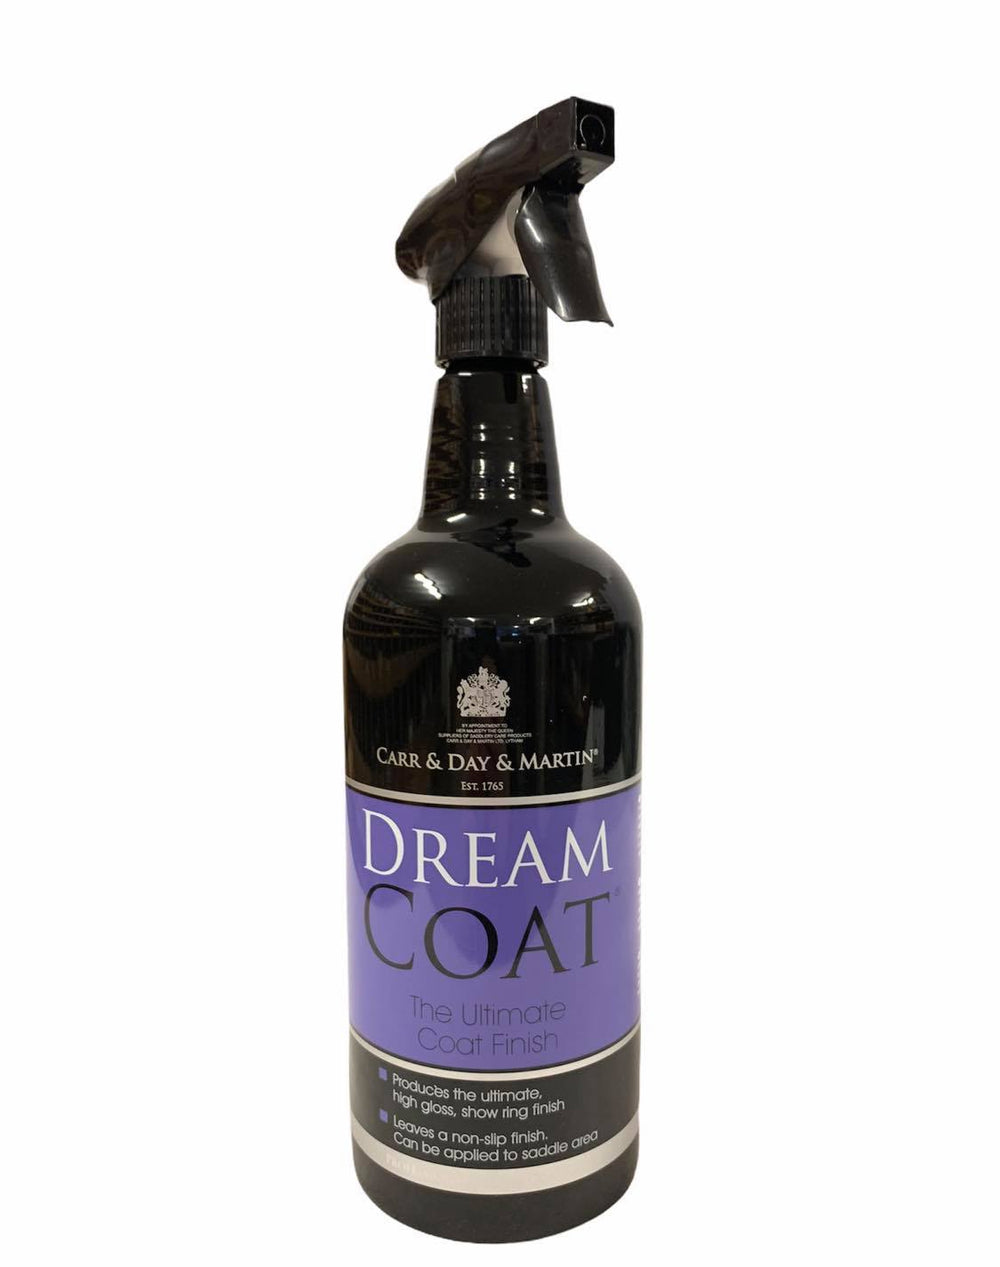 Carr & Day & Martin Dreamcoat spray